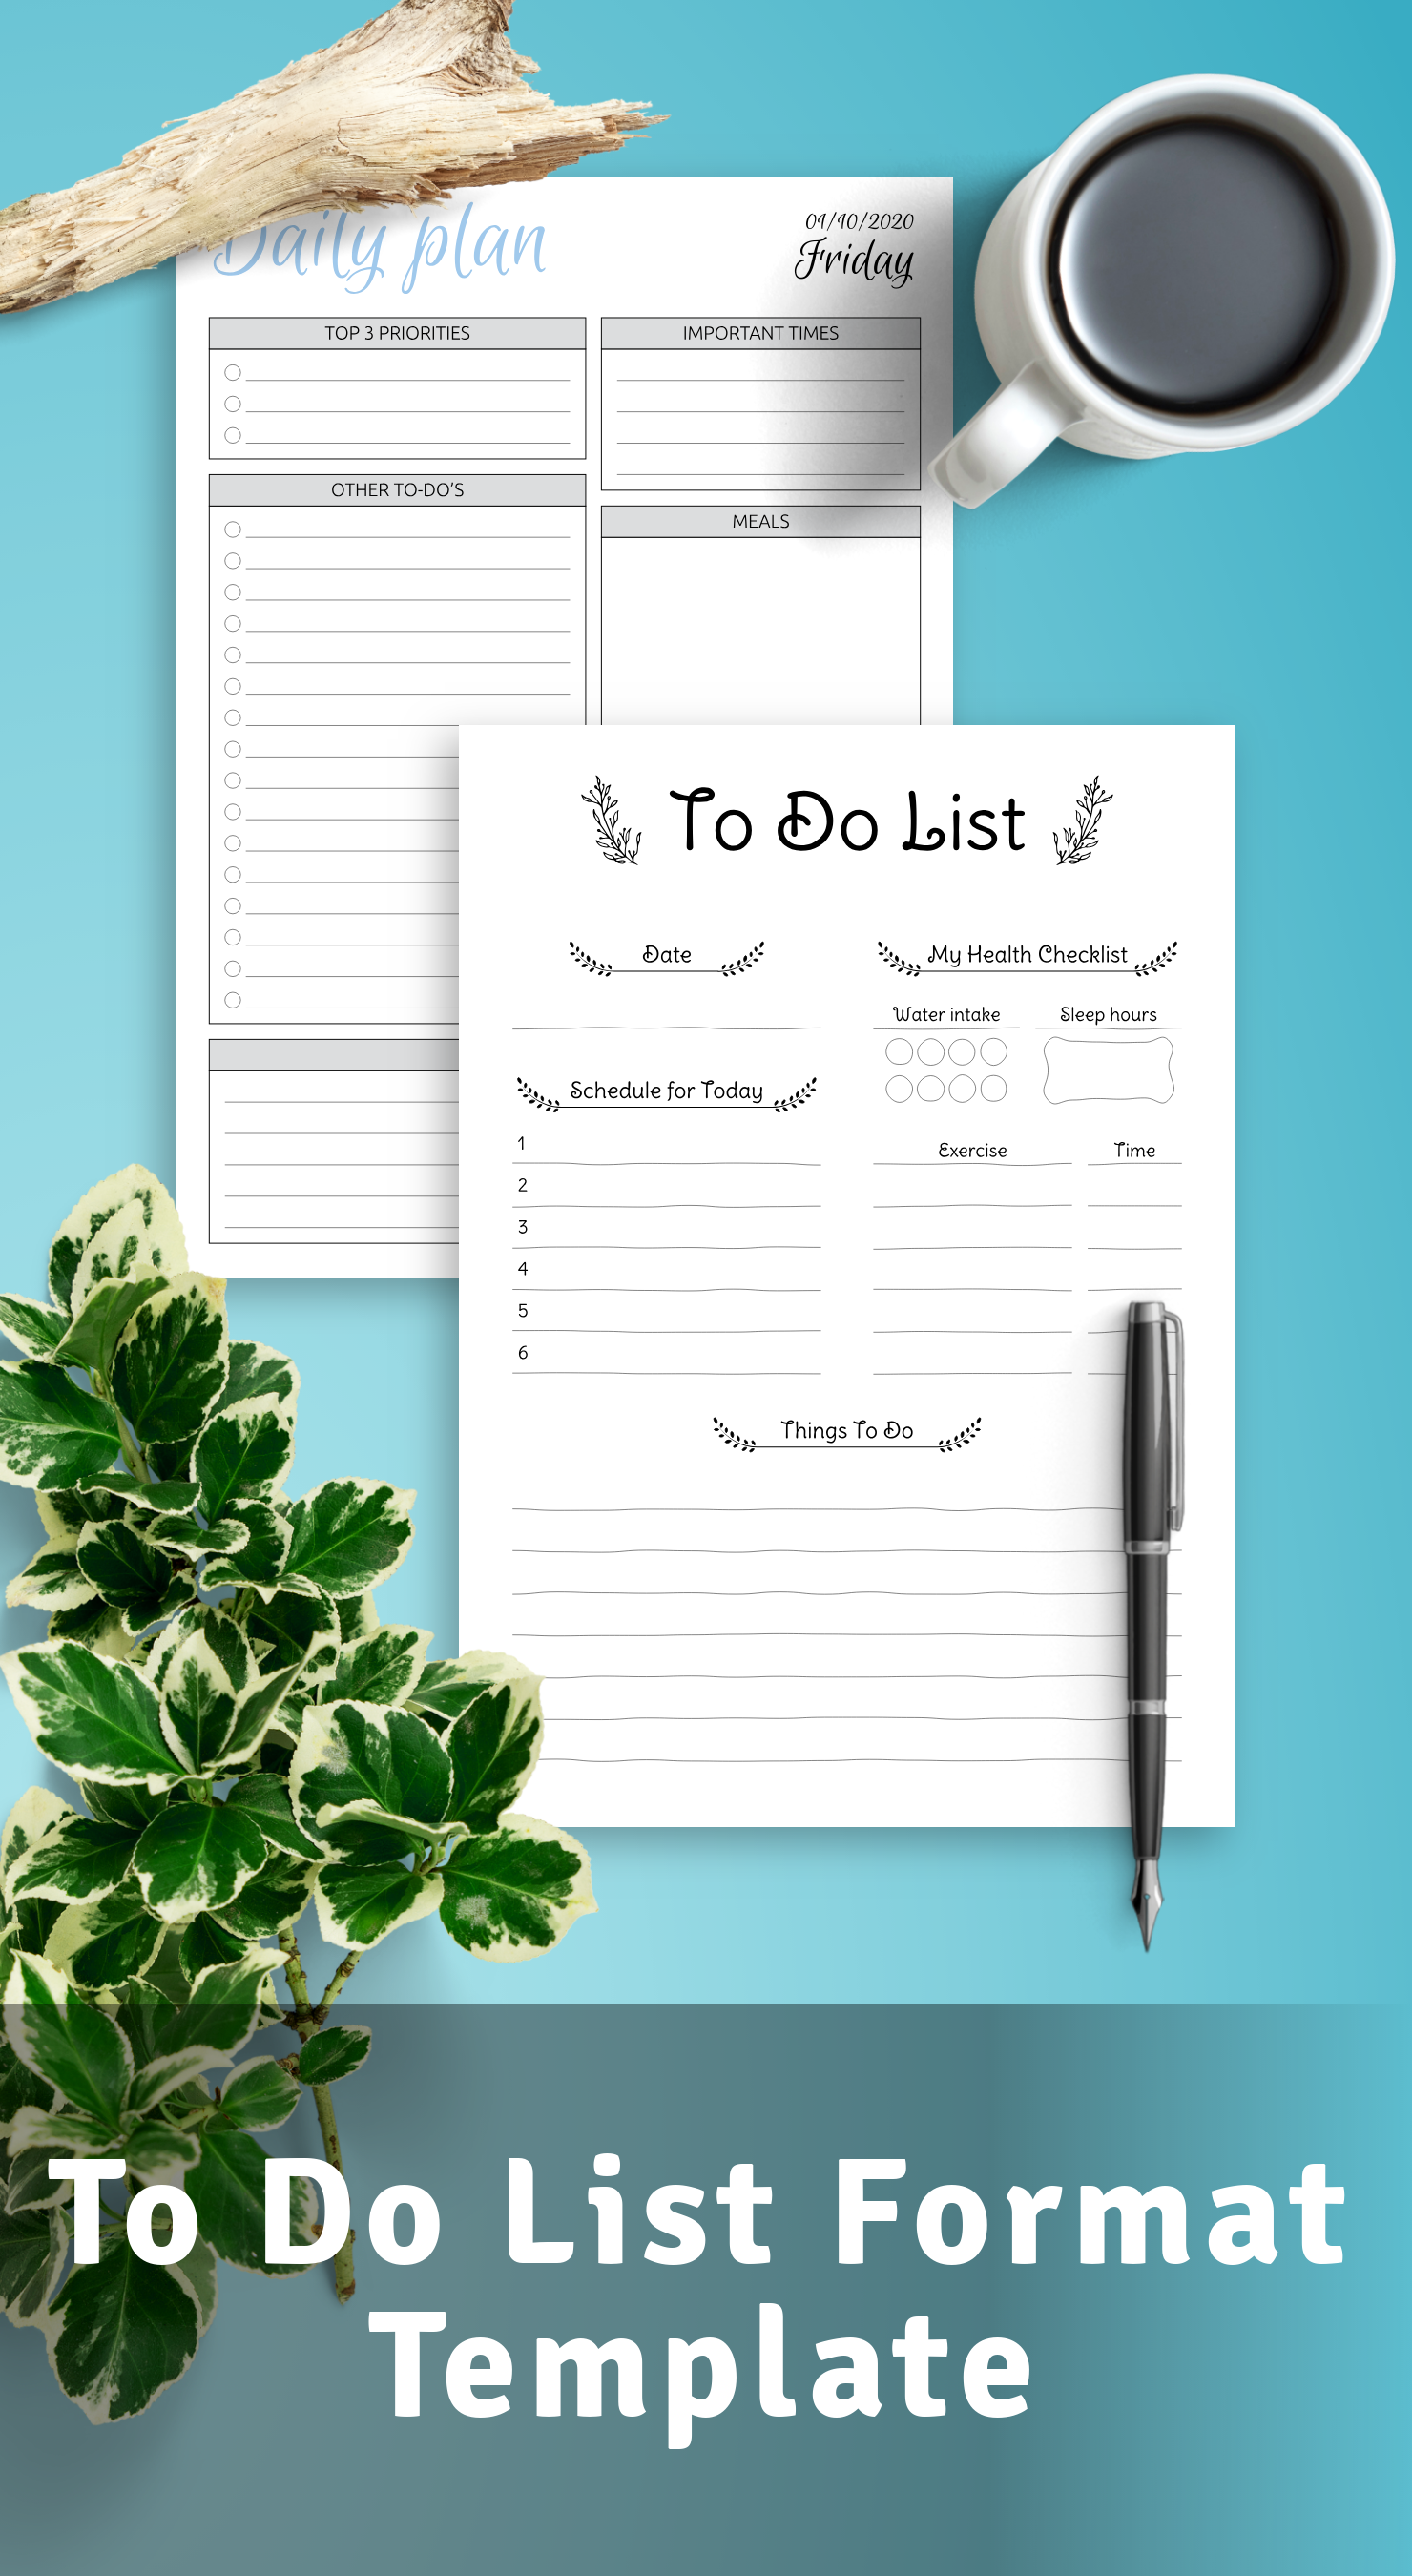 To Do List Format Template PDF